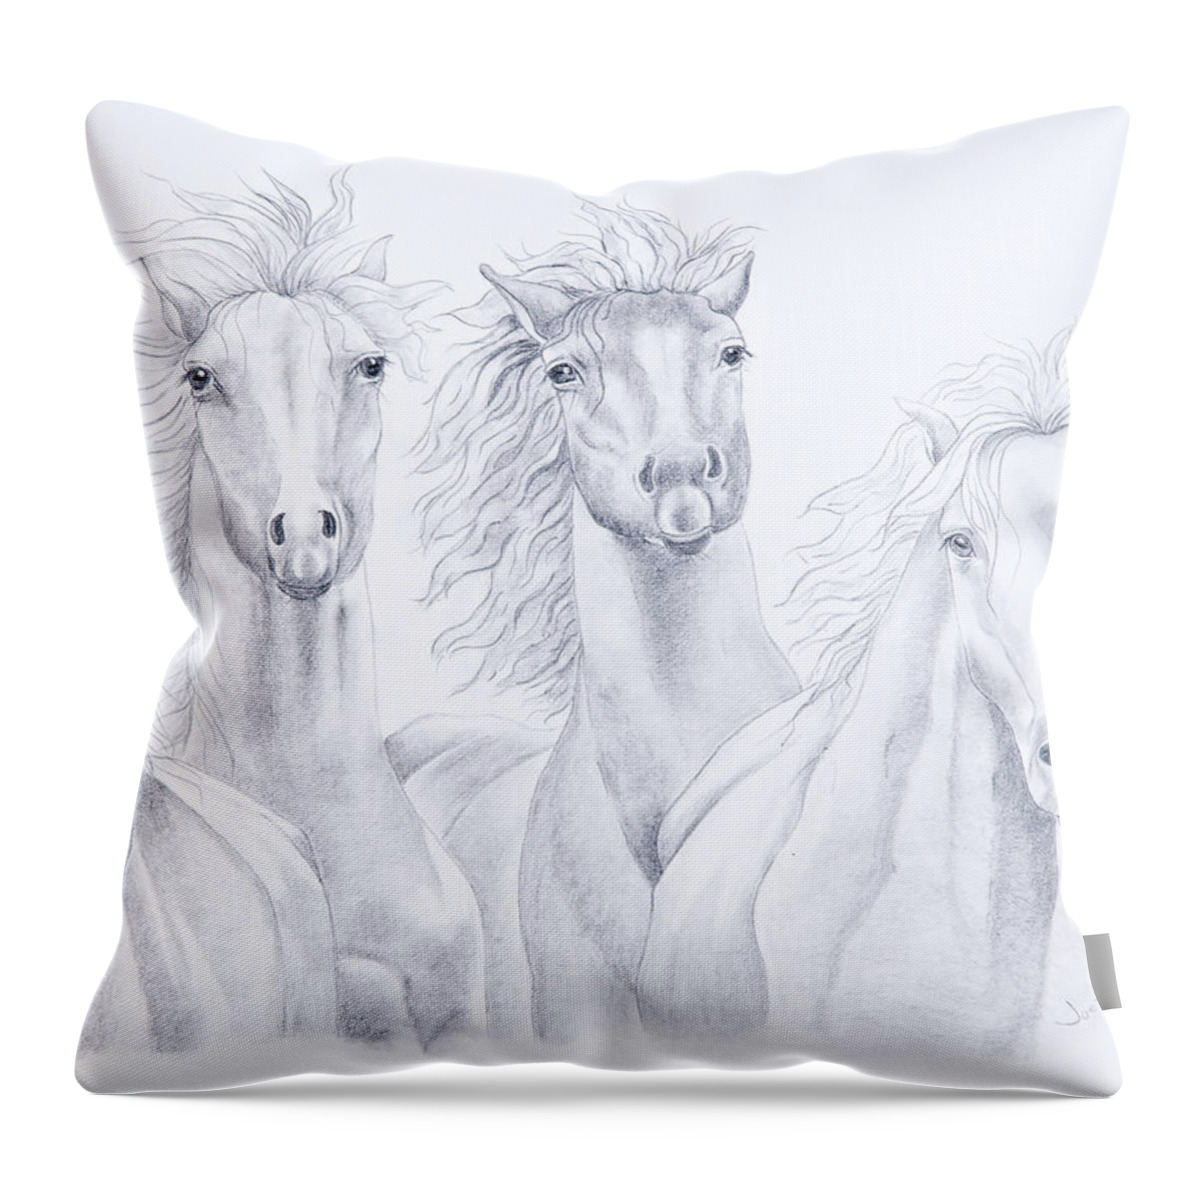 Horse Prints Throw Pillow featuring the drawing Four For Freedom by Joette Snyder